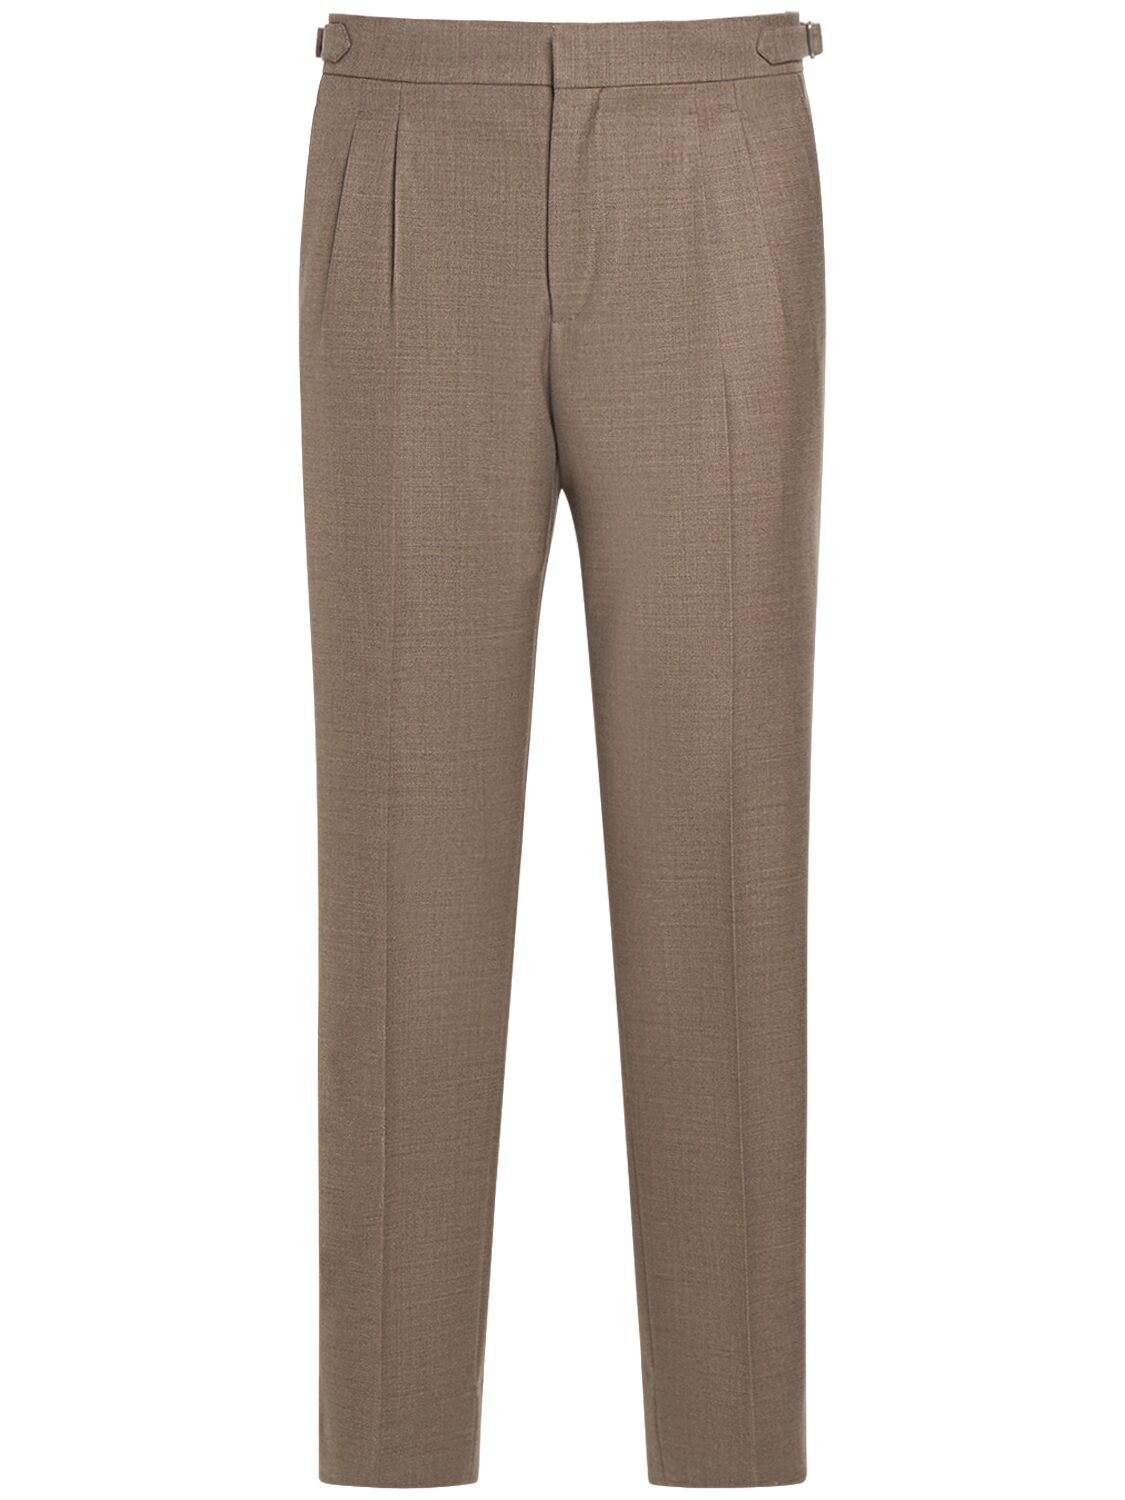 Image of Wool Pleated Pants W/ Buckle Straps